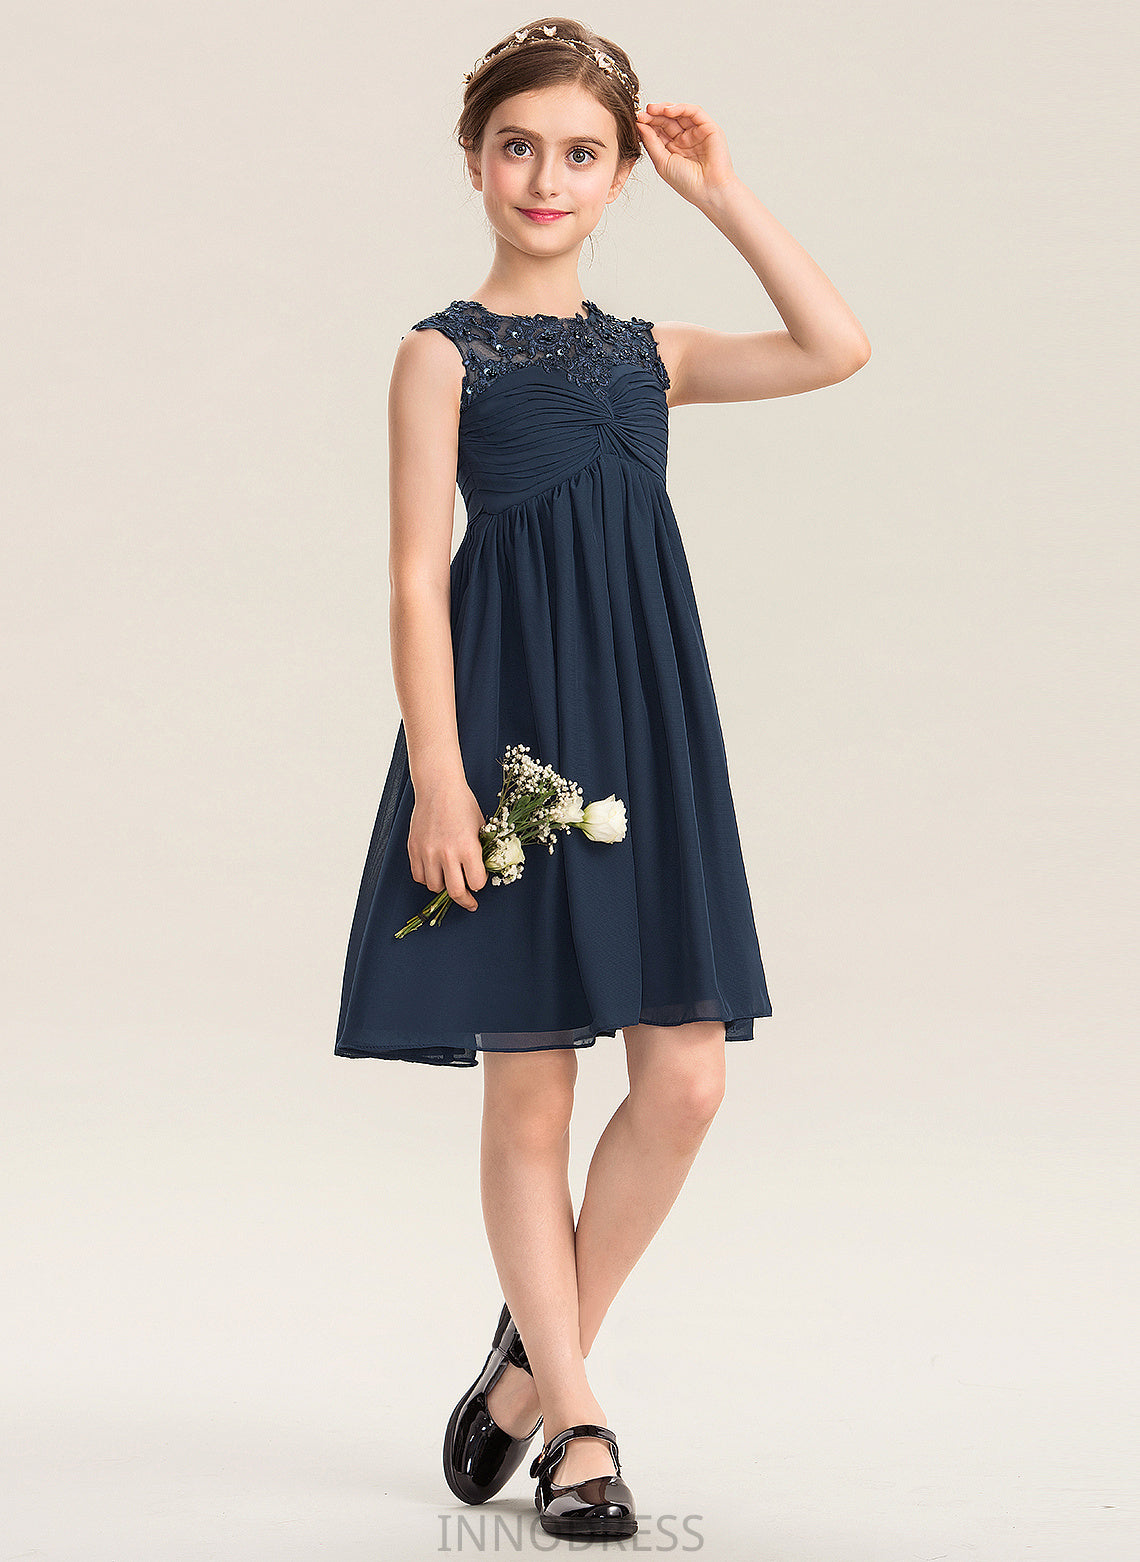 Neck Scoop Sequins Beading Ruffle Joslyn Junior Bridesmaid Dresses Lace With Empire Knee-Length Chiffon